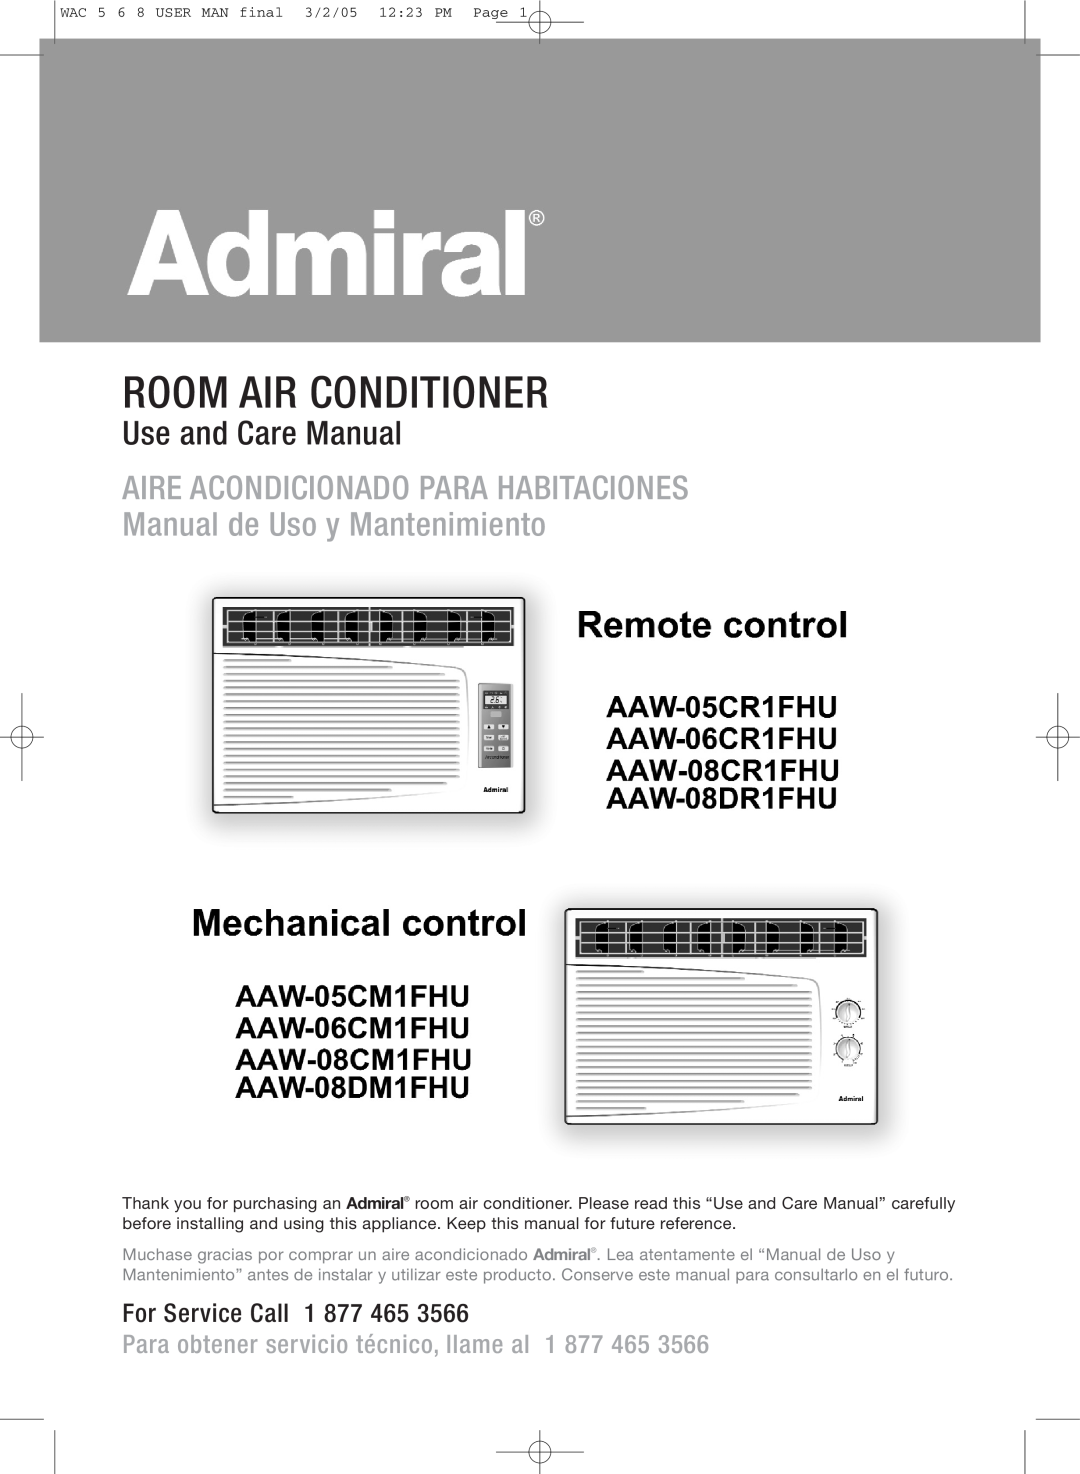 Admiral AAW-08CM1FHU, AAW-08CR1FHU, AAW-06CR1FHU manual Room Air Conditioner, Use and Care Manual, For Service Call 1 